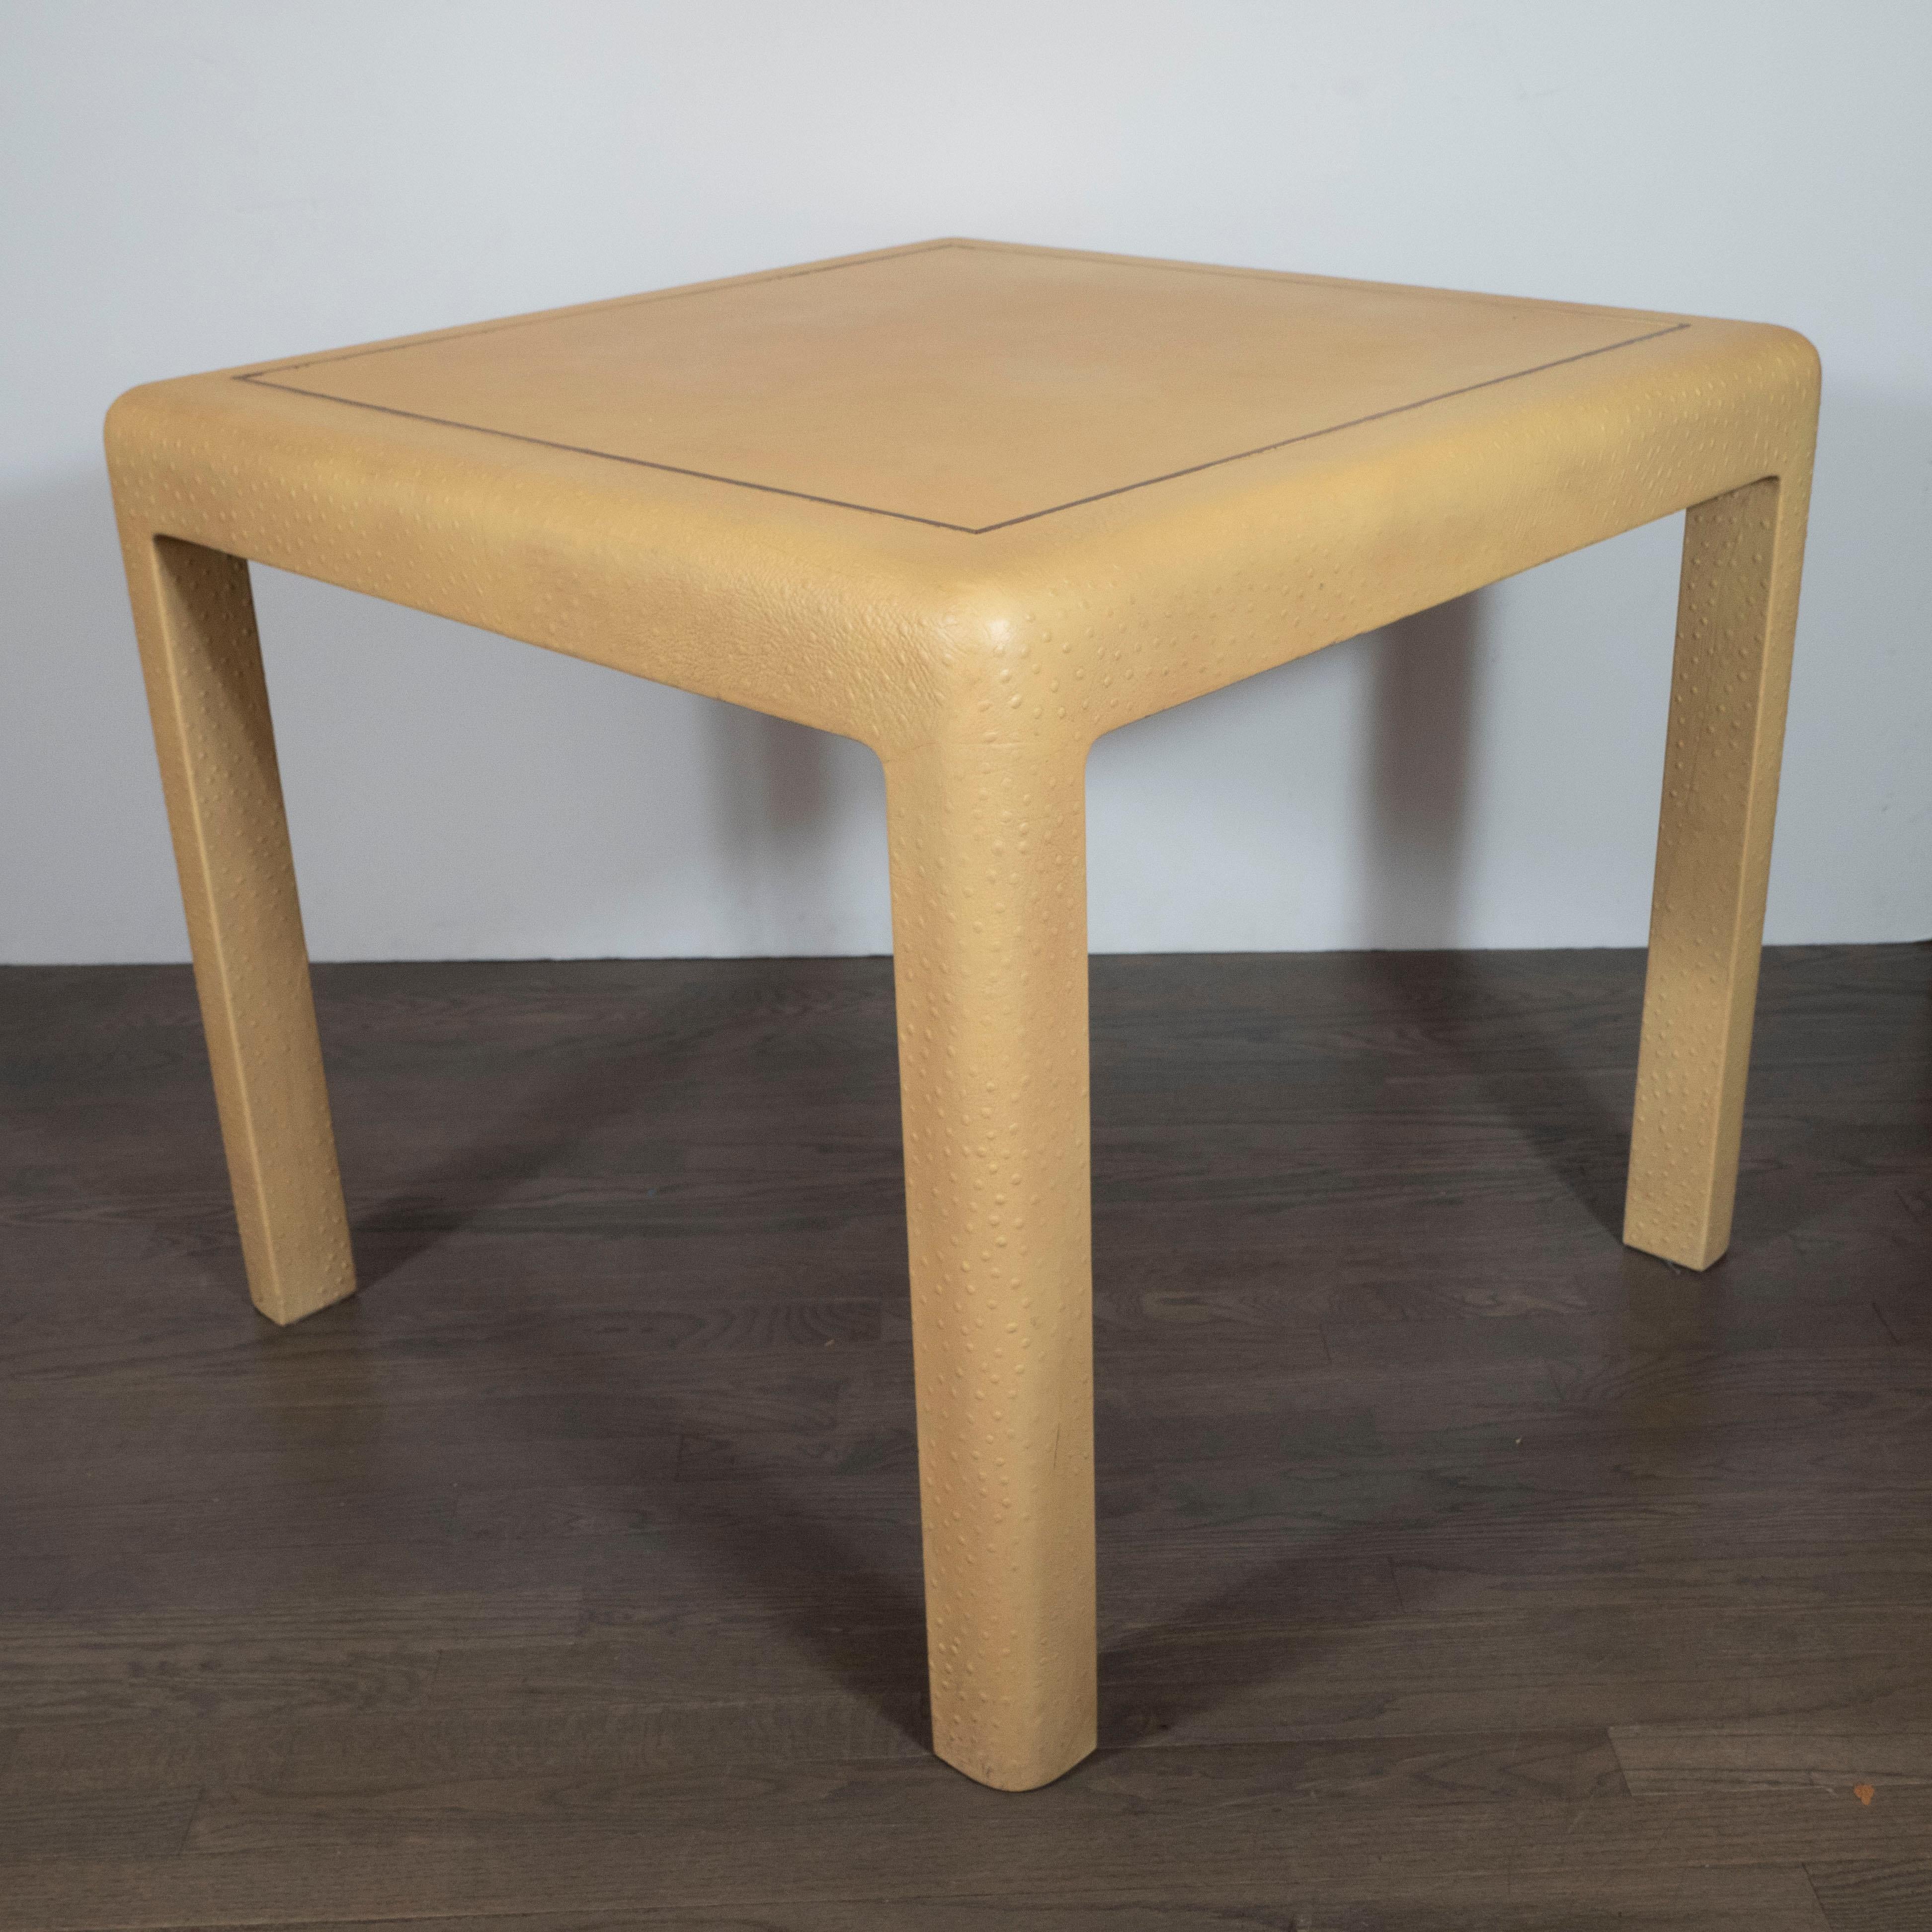 Late 20th Century Signed Mid-Century Modern Ostrich Game Table in Ostrich by Karl Springer